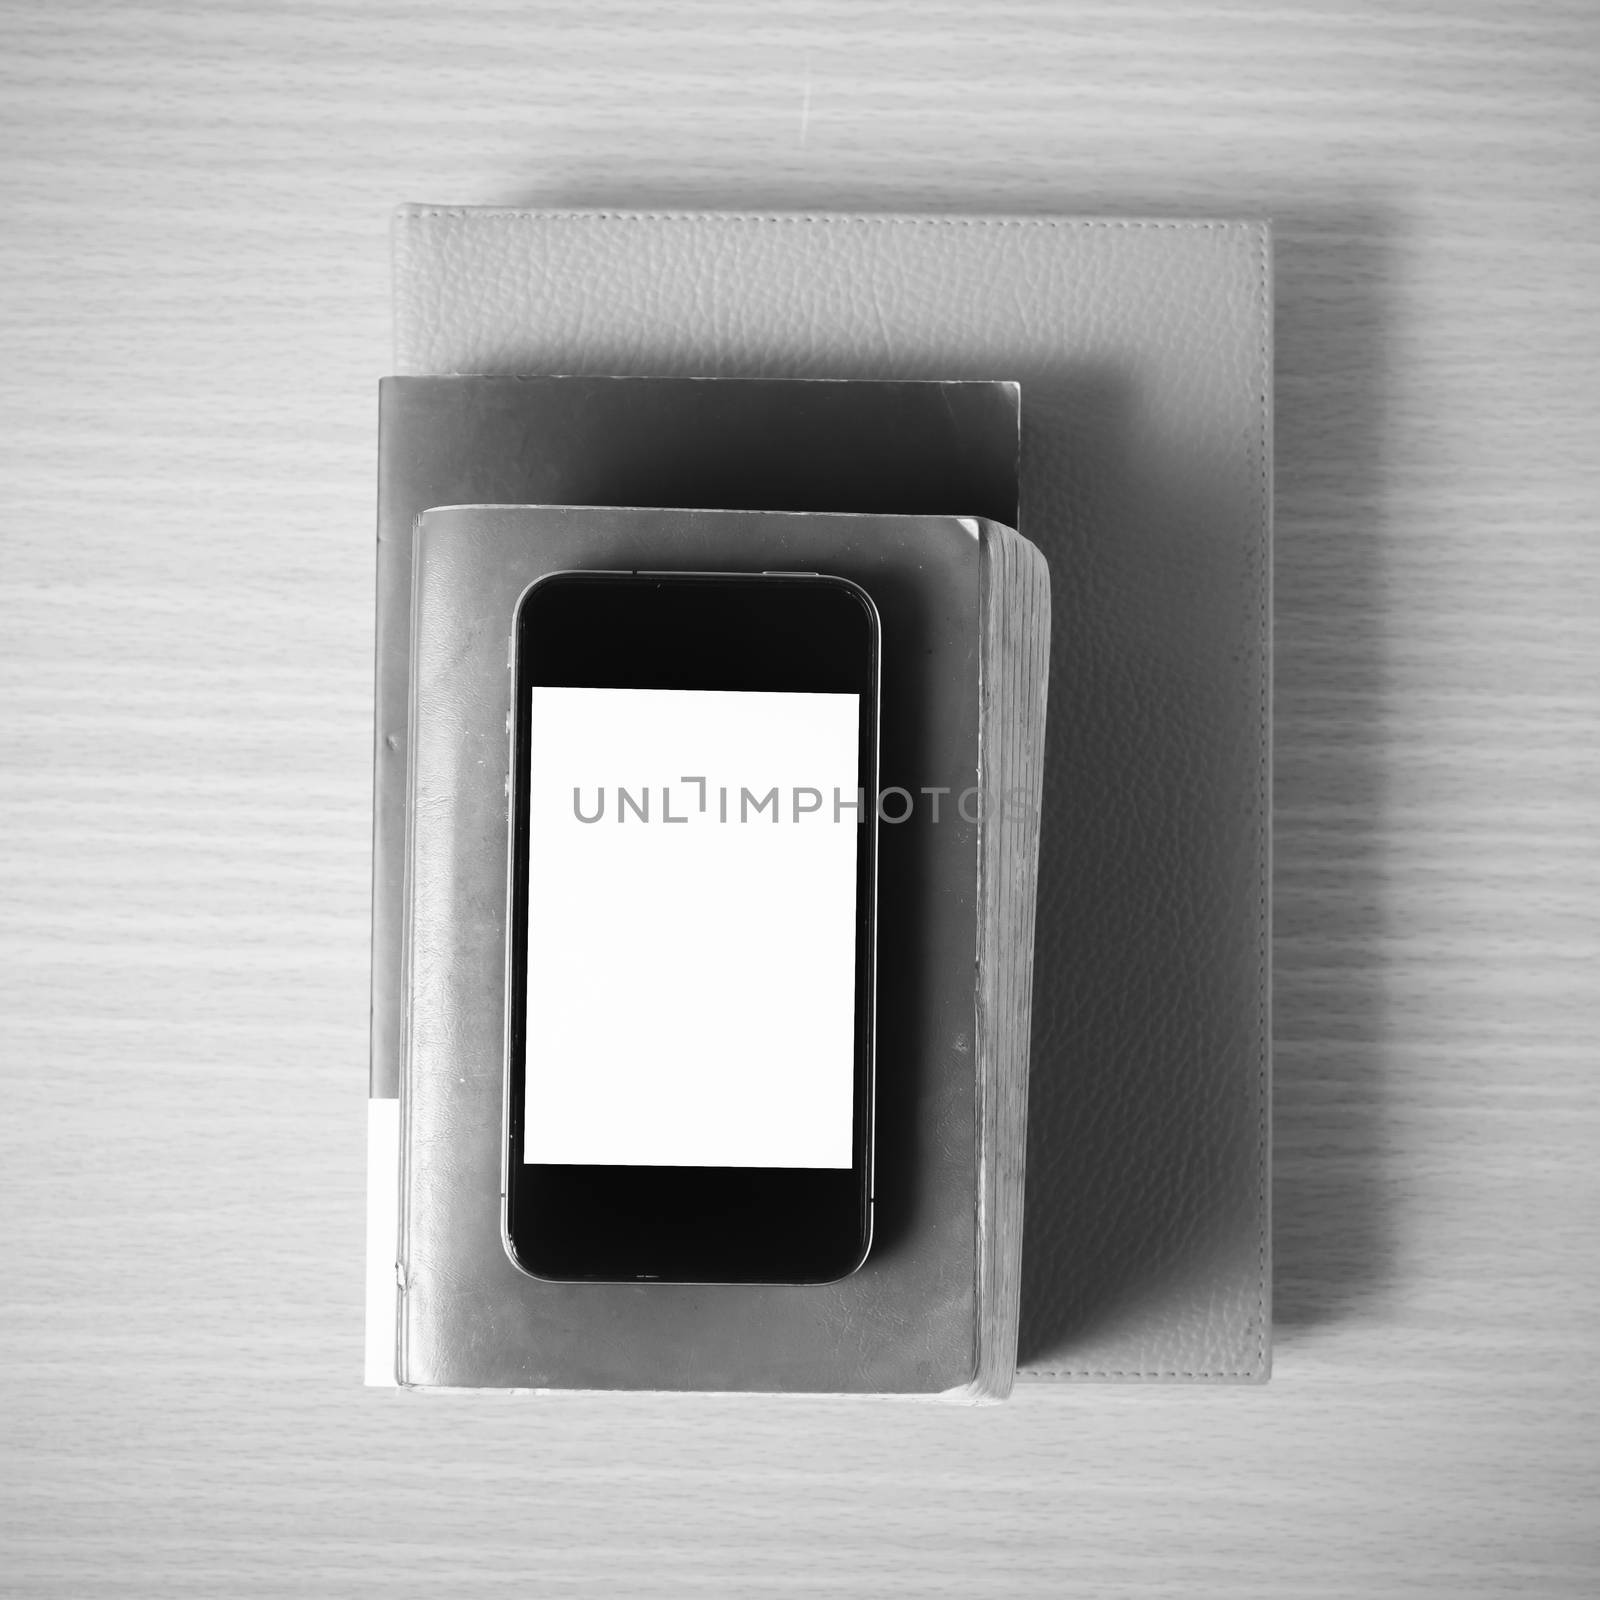 stack of book and smart phone on wood background black and white color tone style